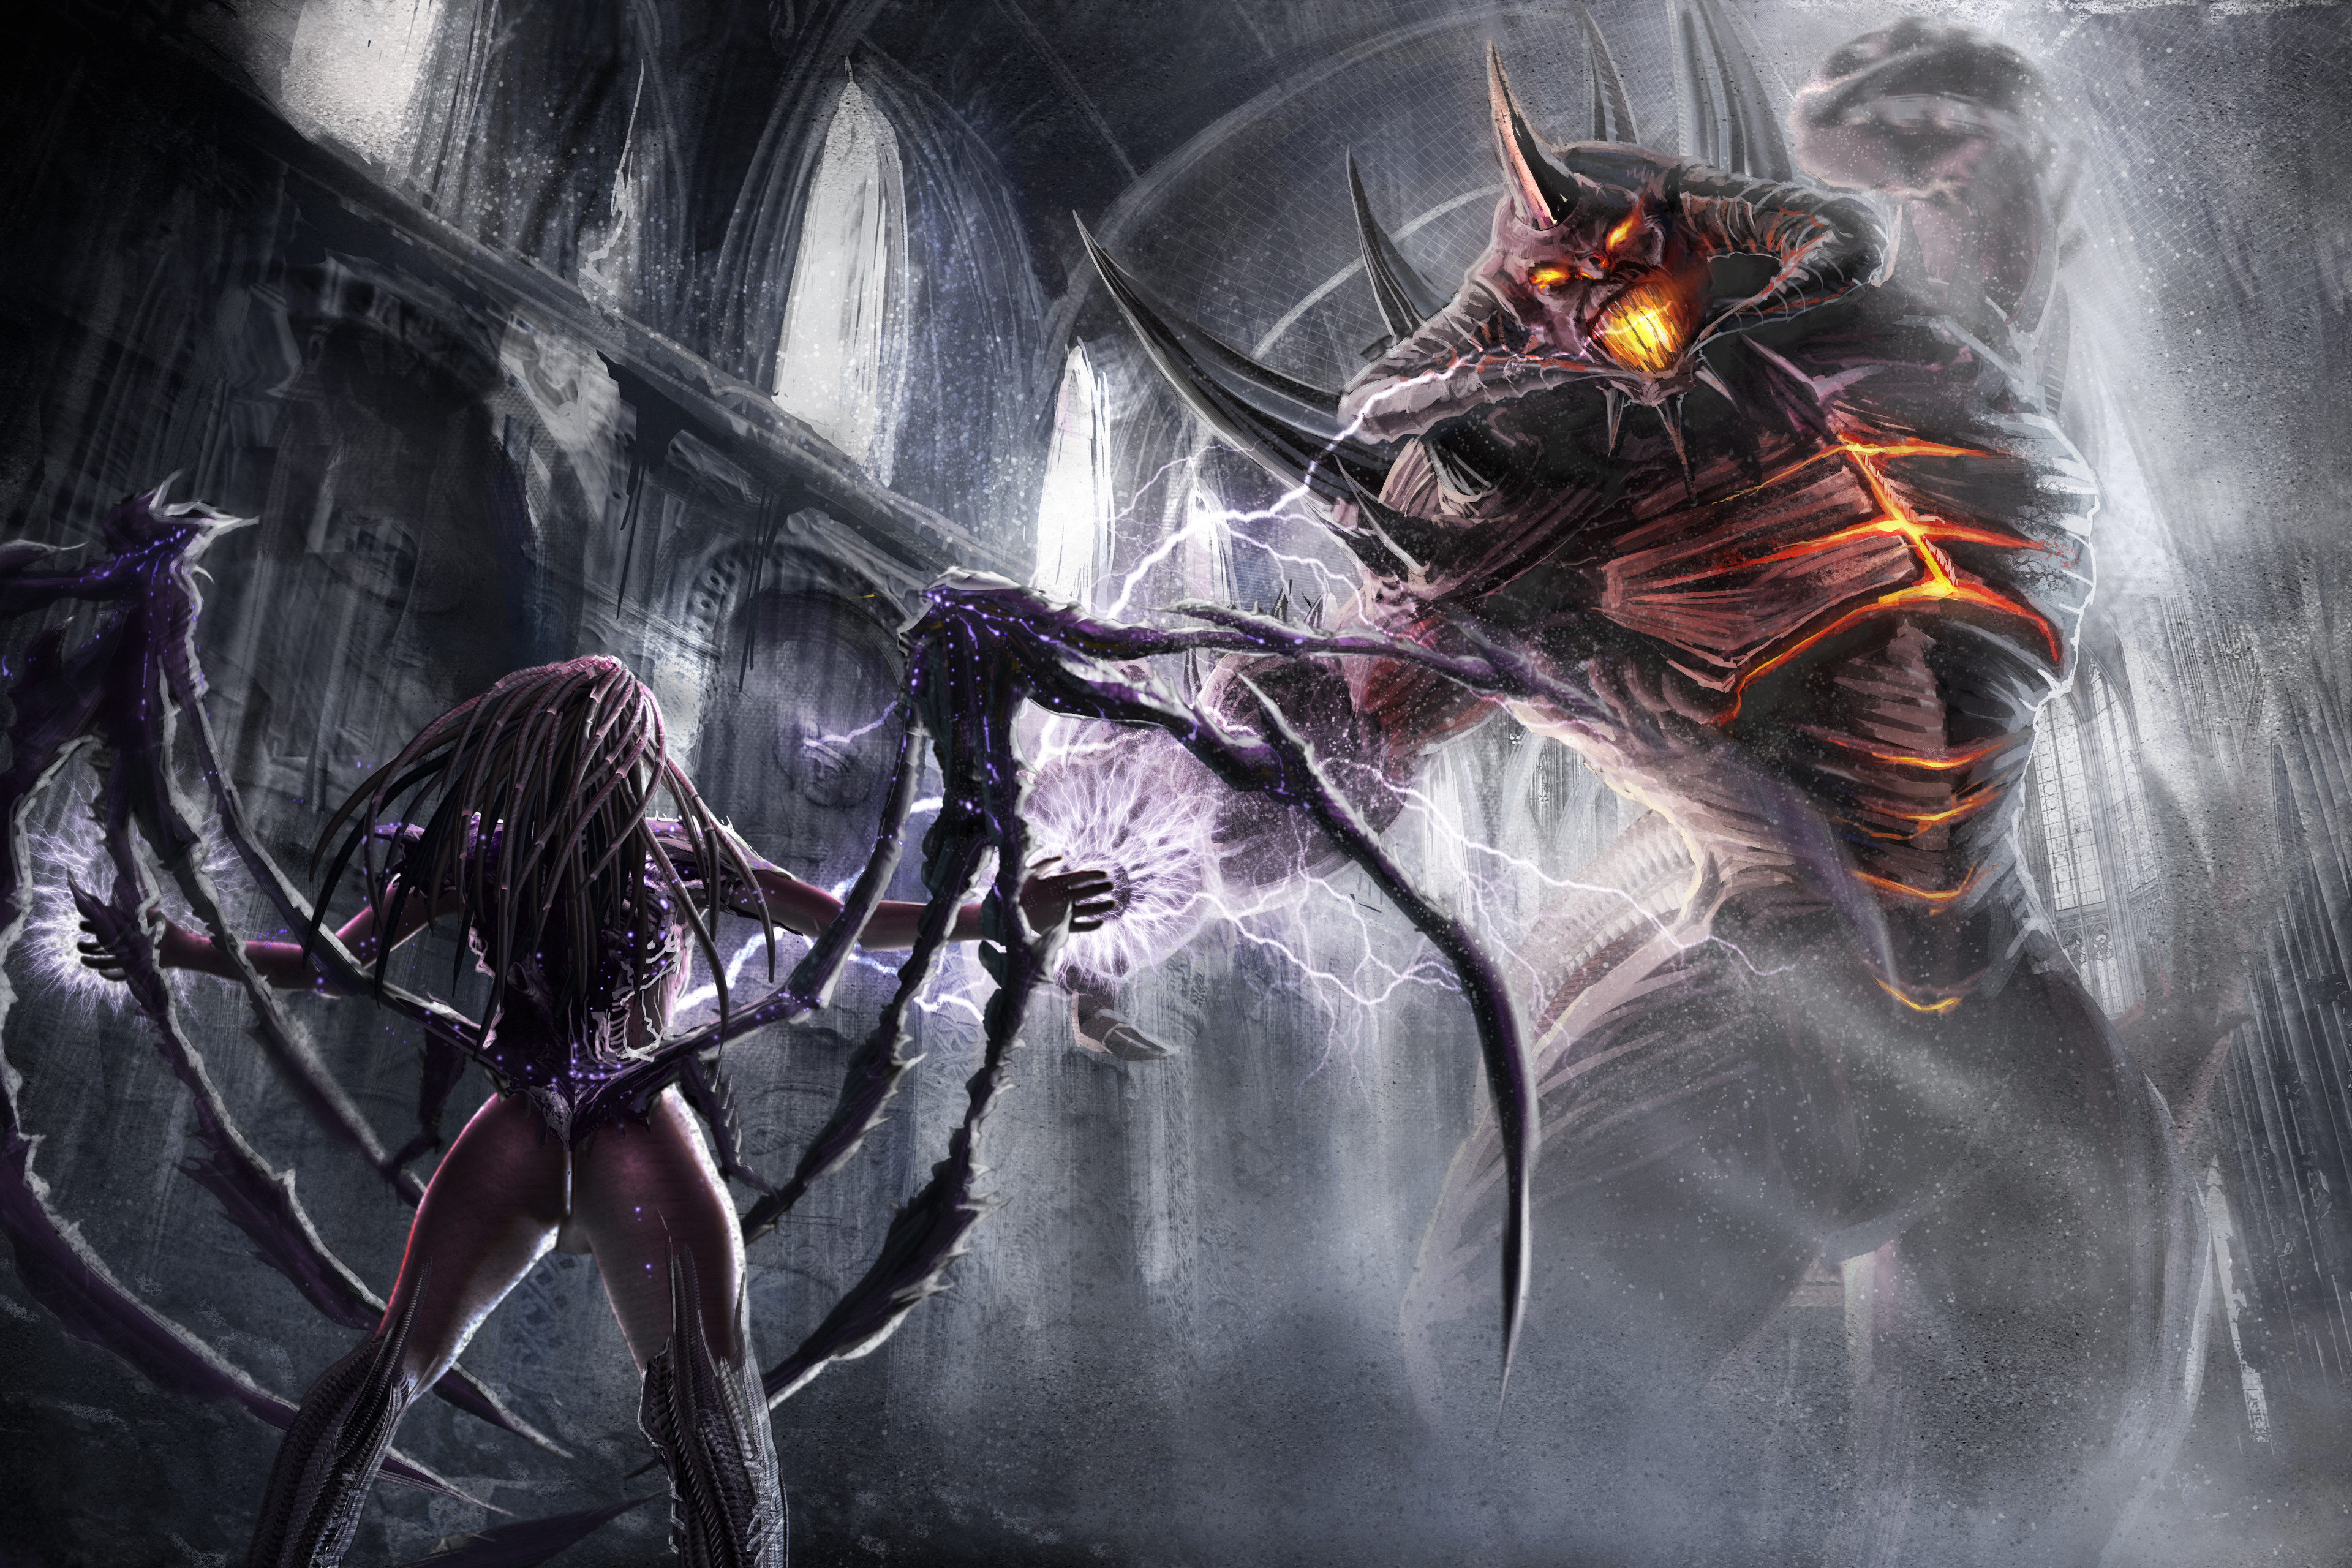 Queen of blades VS Lord of terror.